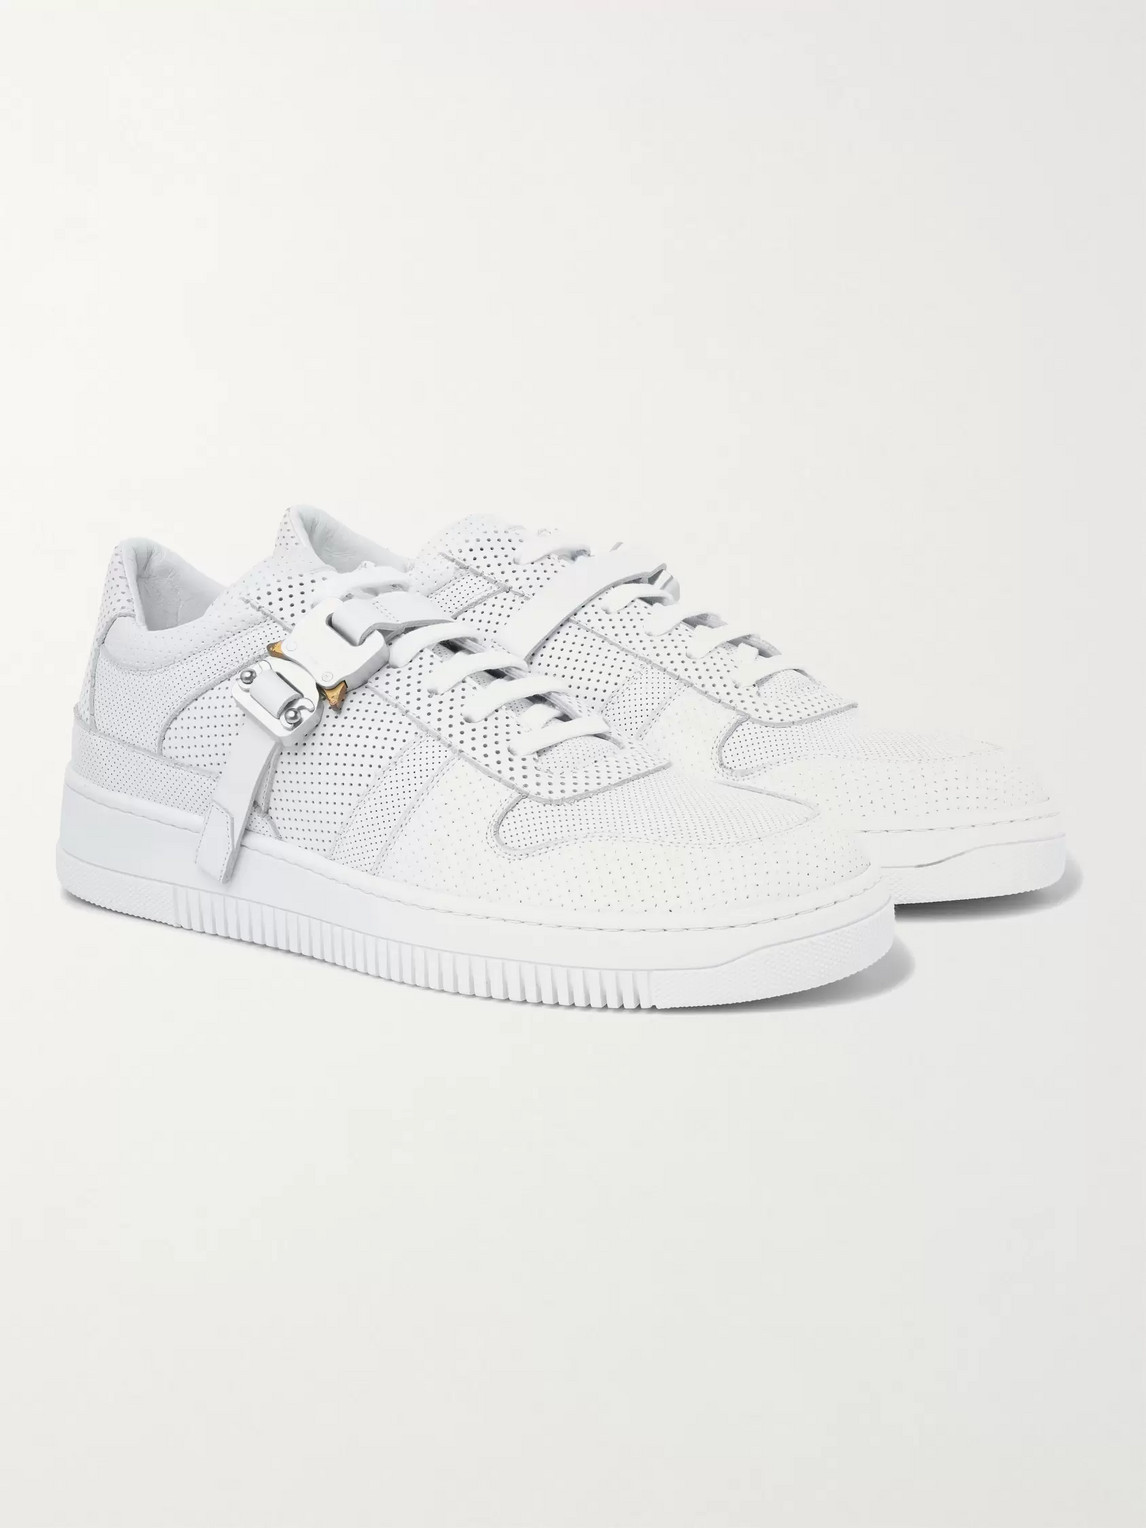 ALYX BUCKLED PERFORATED-LEATHER SNEAKERS